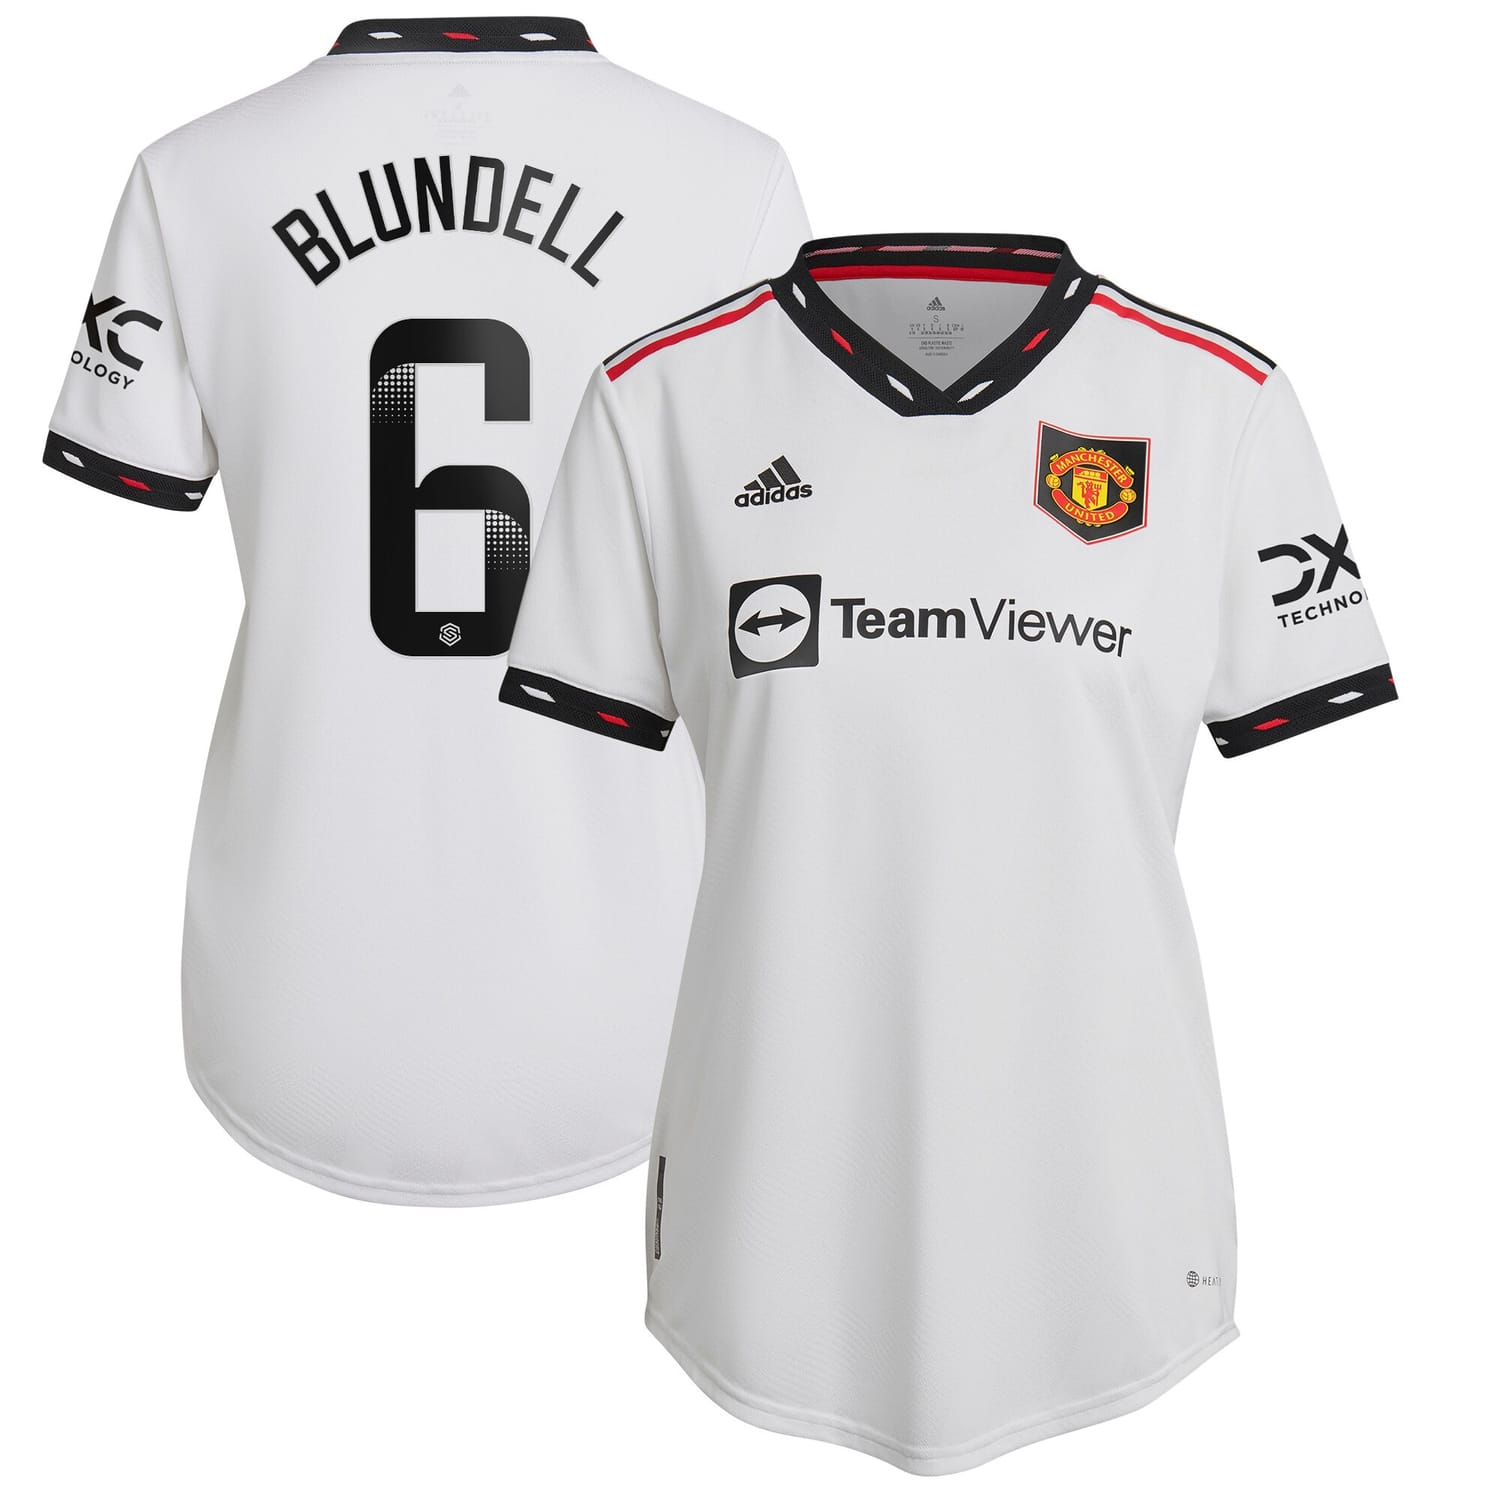 Premier League Manchester United Away WSL Authentic Jersey Shirt 2022-23 player Hannah Blundell 6 printing for Women